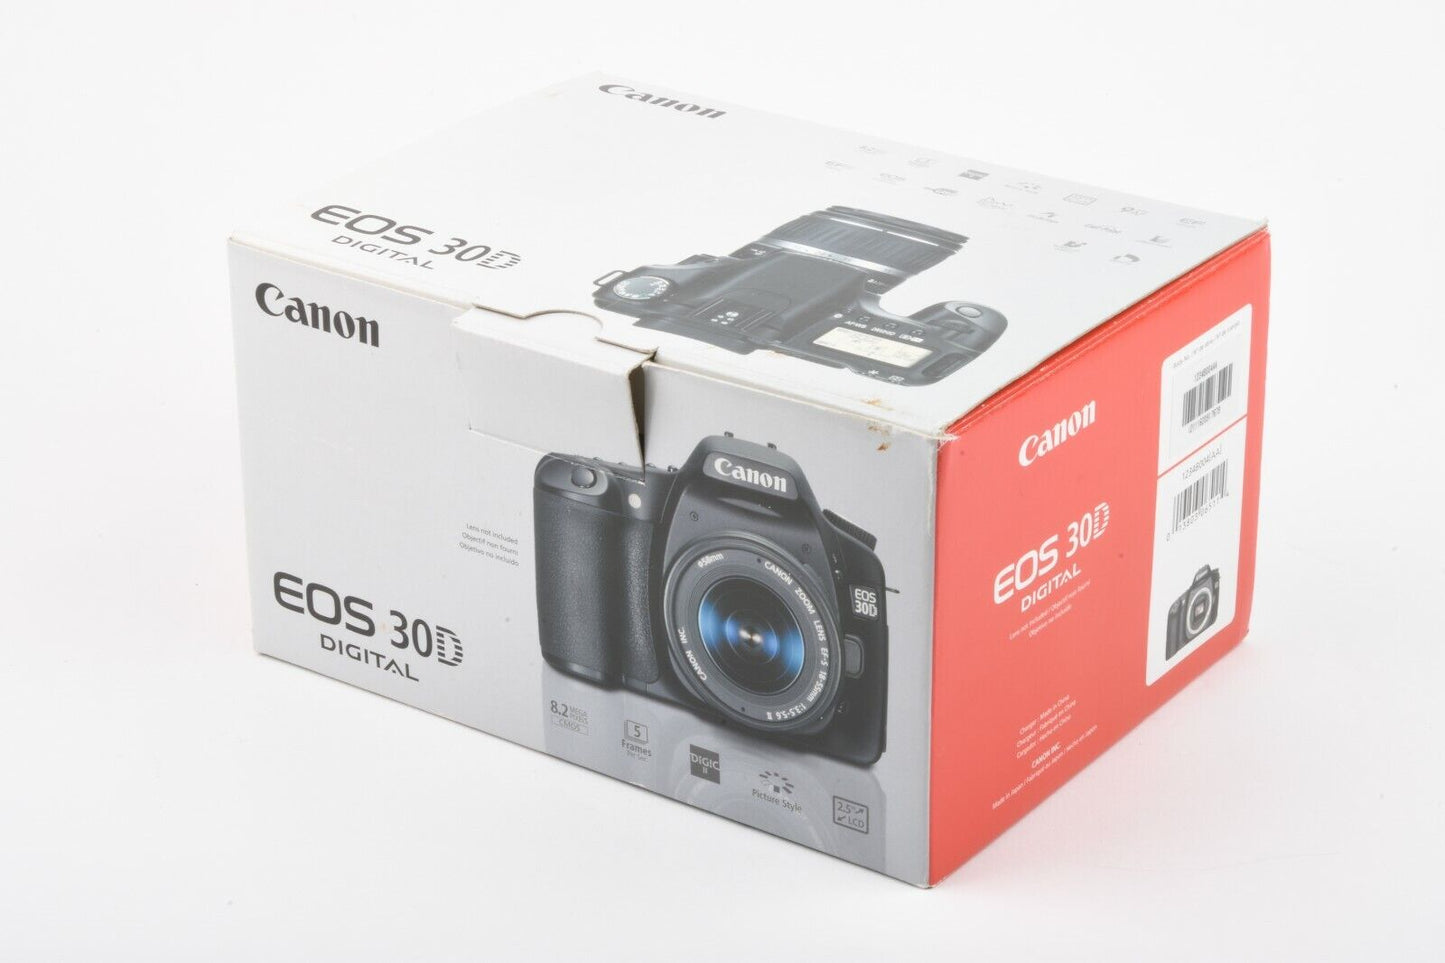 Canon EOS 30D 8.2MP DSLR body, batt, charger, strap, very clean & nice, boxed